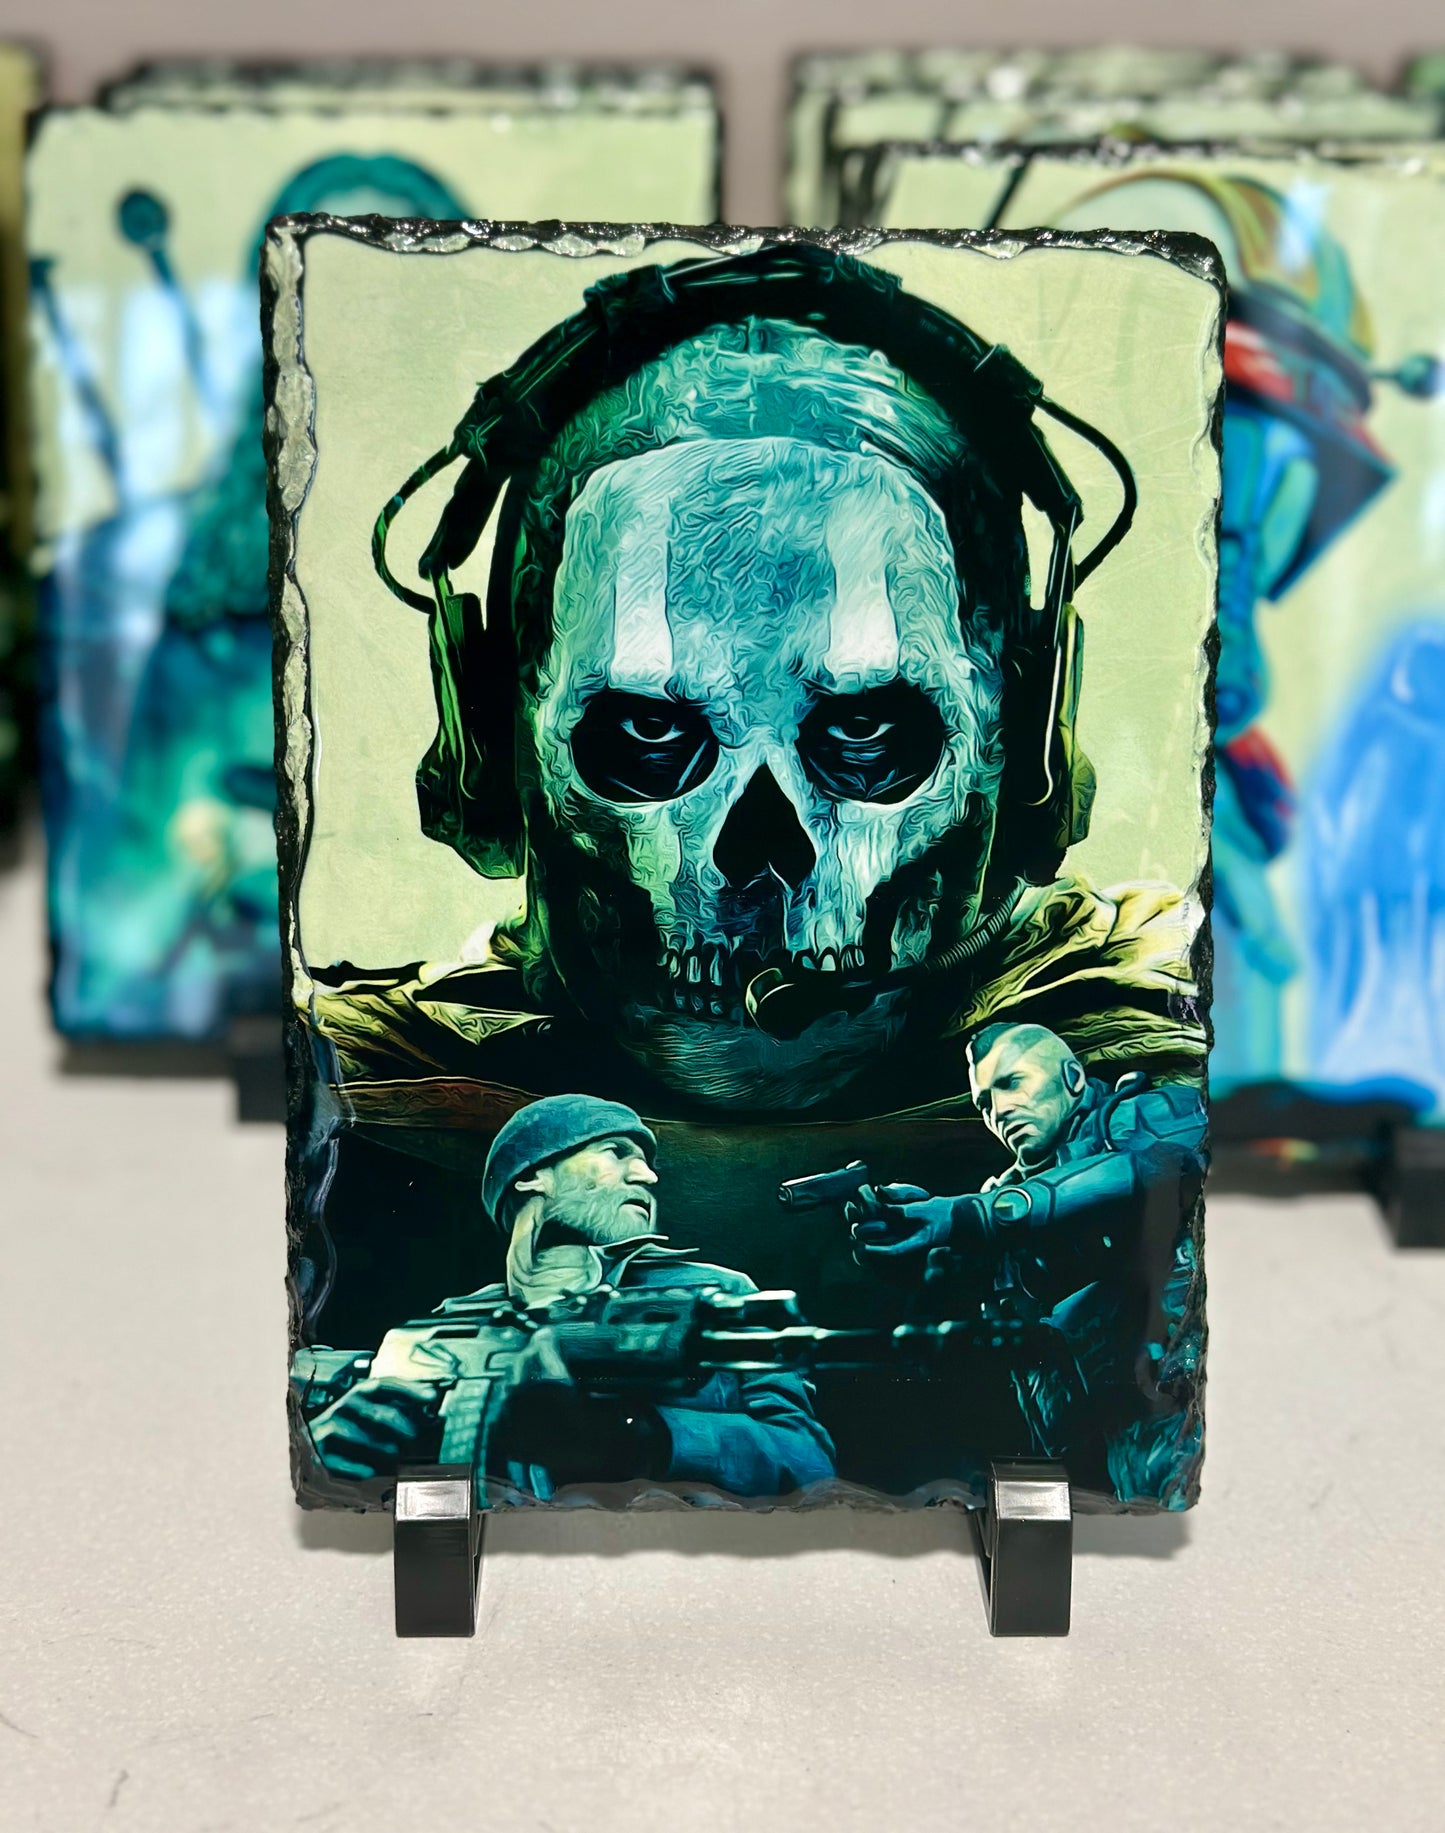 Call of Duty Inspired Ghost artwork on Solid Rock Slate